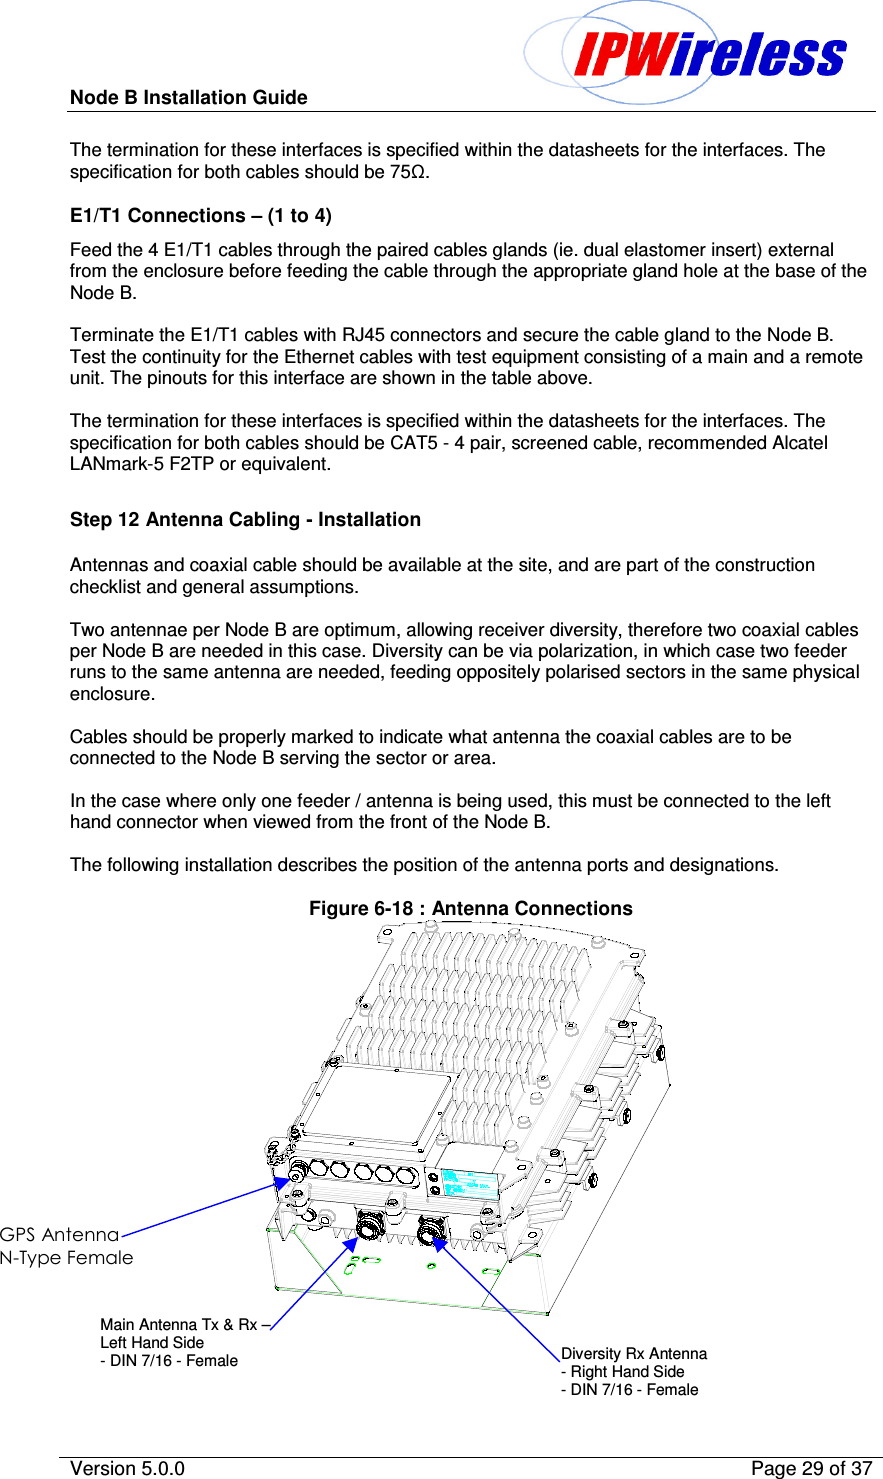 Node B Installation Guide                                              Version 5.0.0    Page 29 of 37  The termination for these interfaces is specified within the datasheets for the interfaces. The specification for both cables should be 75.  E1/T1 Connections – (1 to 4) Feed the 4 E1/T1 cables through the paired cables glands (ie. dual elastomer insert) external from the enclosure before feeding the cable through the appropriate gland hole at the base of the Node B.  Terminate the E1/T1 cables with RJ45 connectors and secure the cable gland to the Node B. Test the continuity for the Ethernet cables with test equipment consisting of a main and a remote unit. The pinouts for this interface are shown in the table above.  The termination for these interfaces is specified within the datasheets for the interfaces. The specification for both cables should be CAT5 - 4 pair, screened cable, recommended Alcatel LANmark-5 F2TP or equivalent.  Step 12 Antenna Cabling - Installation Antennas and coaxial cable should be available at the site, and are part of the construction checklist and general assumptions.   Two antennae per Node B are optimum, allowing receiver diversity, therefore two coaxial cables per Node B are needed in this case. Diversity can be via polarization, in which case two feeder runs to the same antenna are needed, feeding oppositely polarised sectors in the same physical enclosure.  Cables should be properly marked to indicate what antenna the coaxial cables are to be connected to the Node B serving the sector or area.  In the case where only one feeder / antenna is being used, this must be connected to the left hand connector when viewed from the front of the Node B.  The following installation describes the position of the antenna ports and designations.  Figure 6-18 : Antenna Connections     Main Antenna Tx &amp; Rx – Left Hand Side - DIN 7/16 - Female  Diversity Rx Antenna - Right Hand Side - DIN 7/16 - Female –     